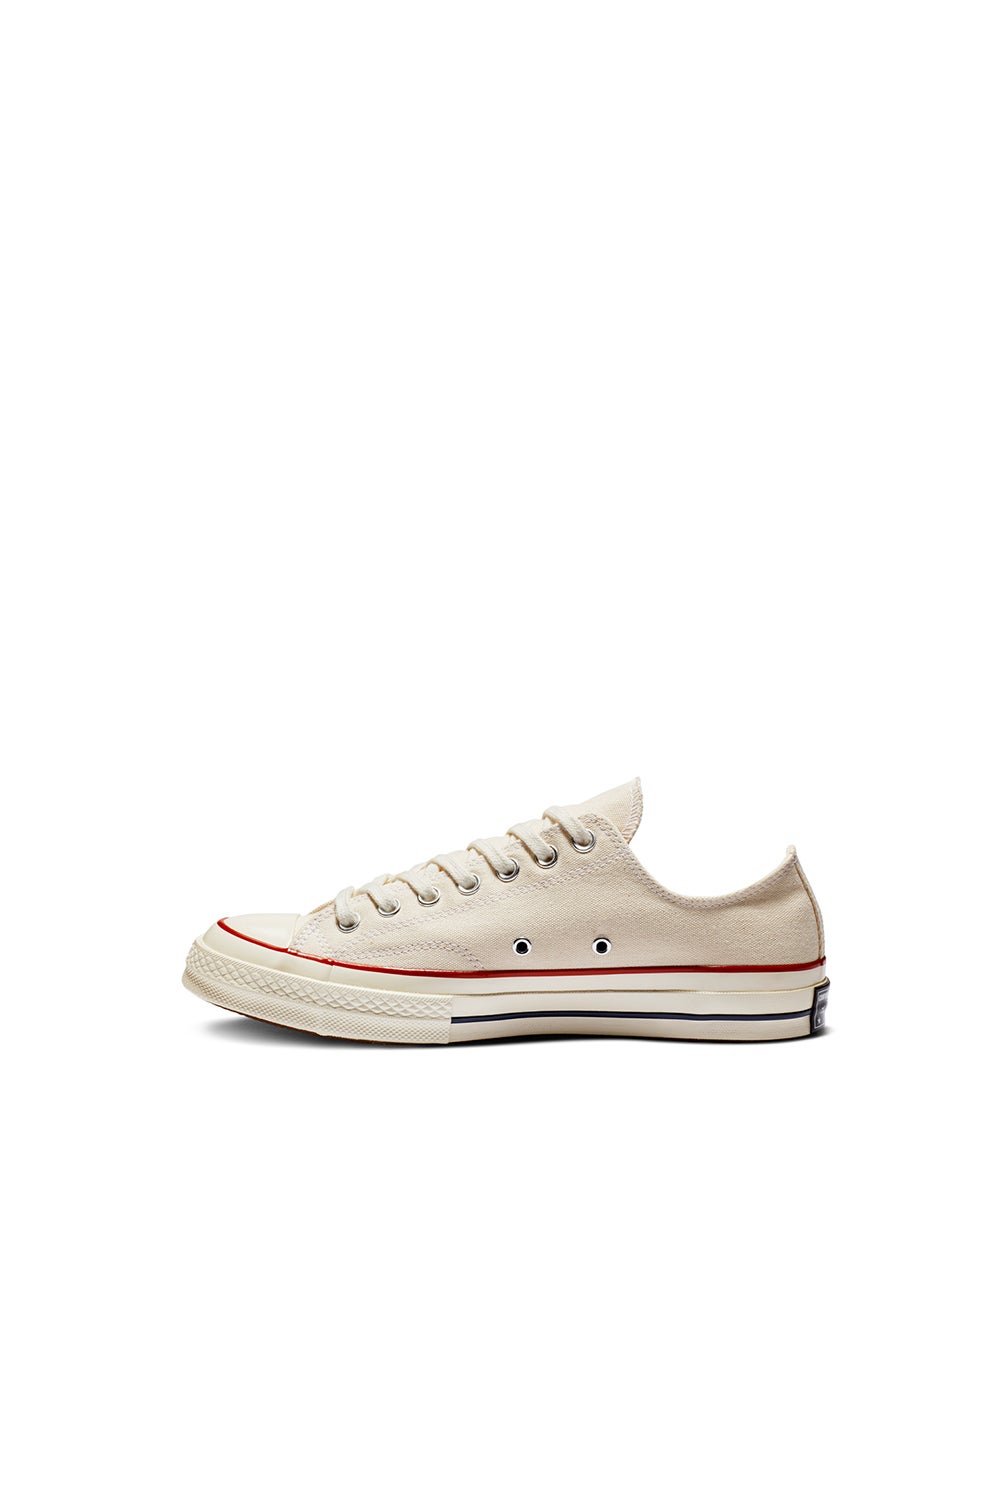 converse chuck ii low top parchment